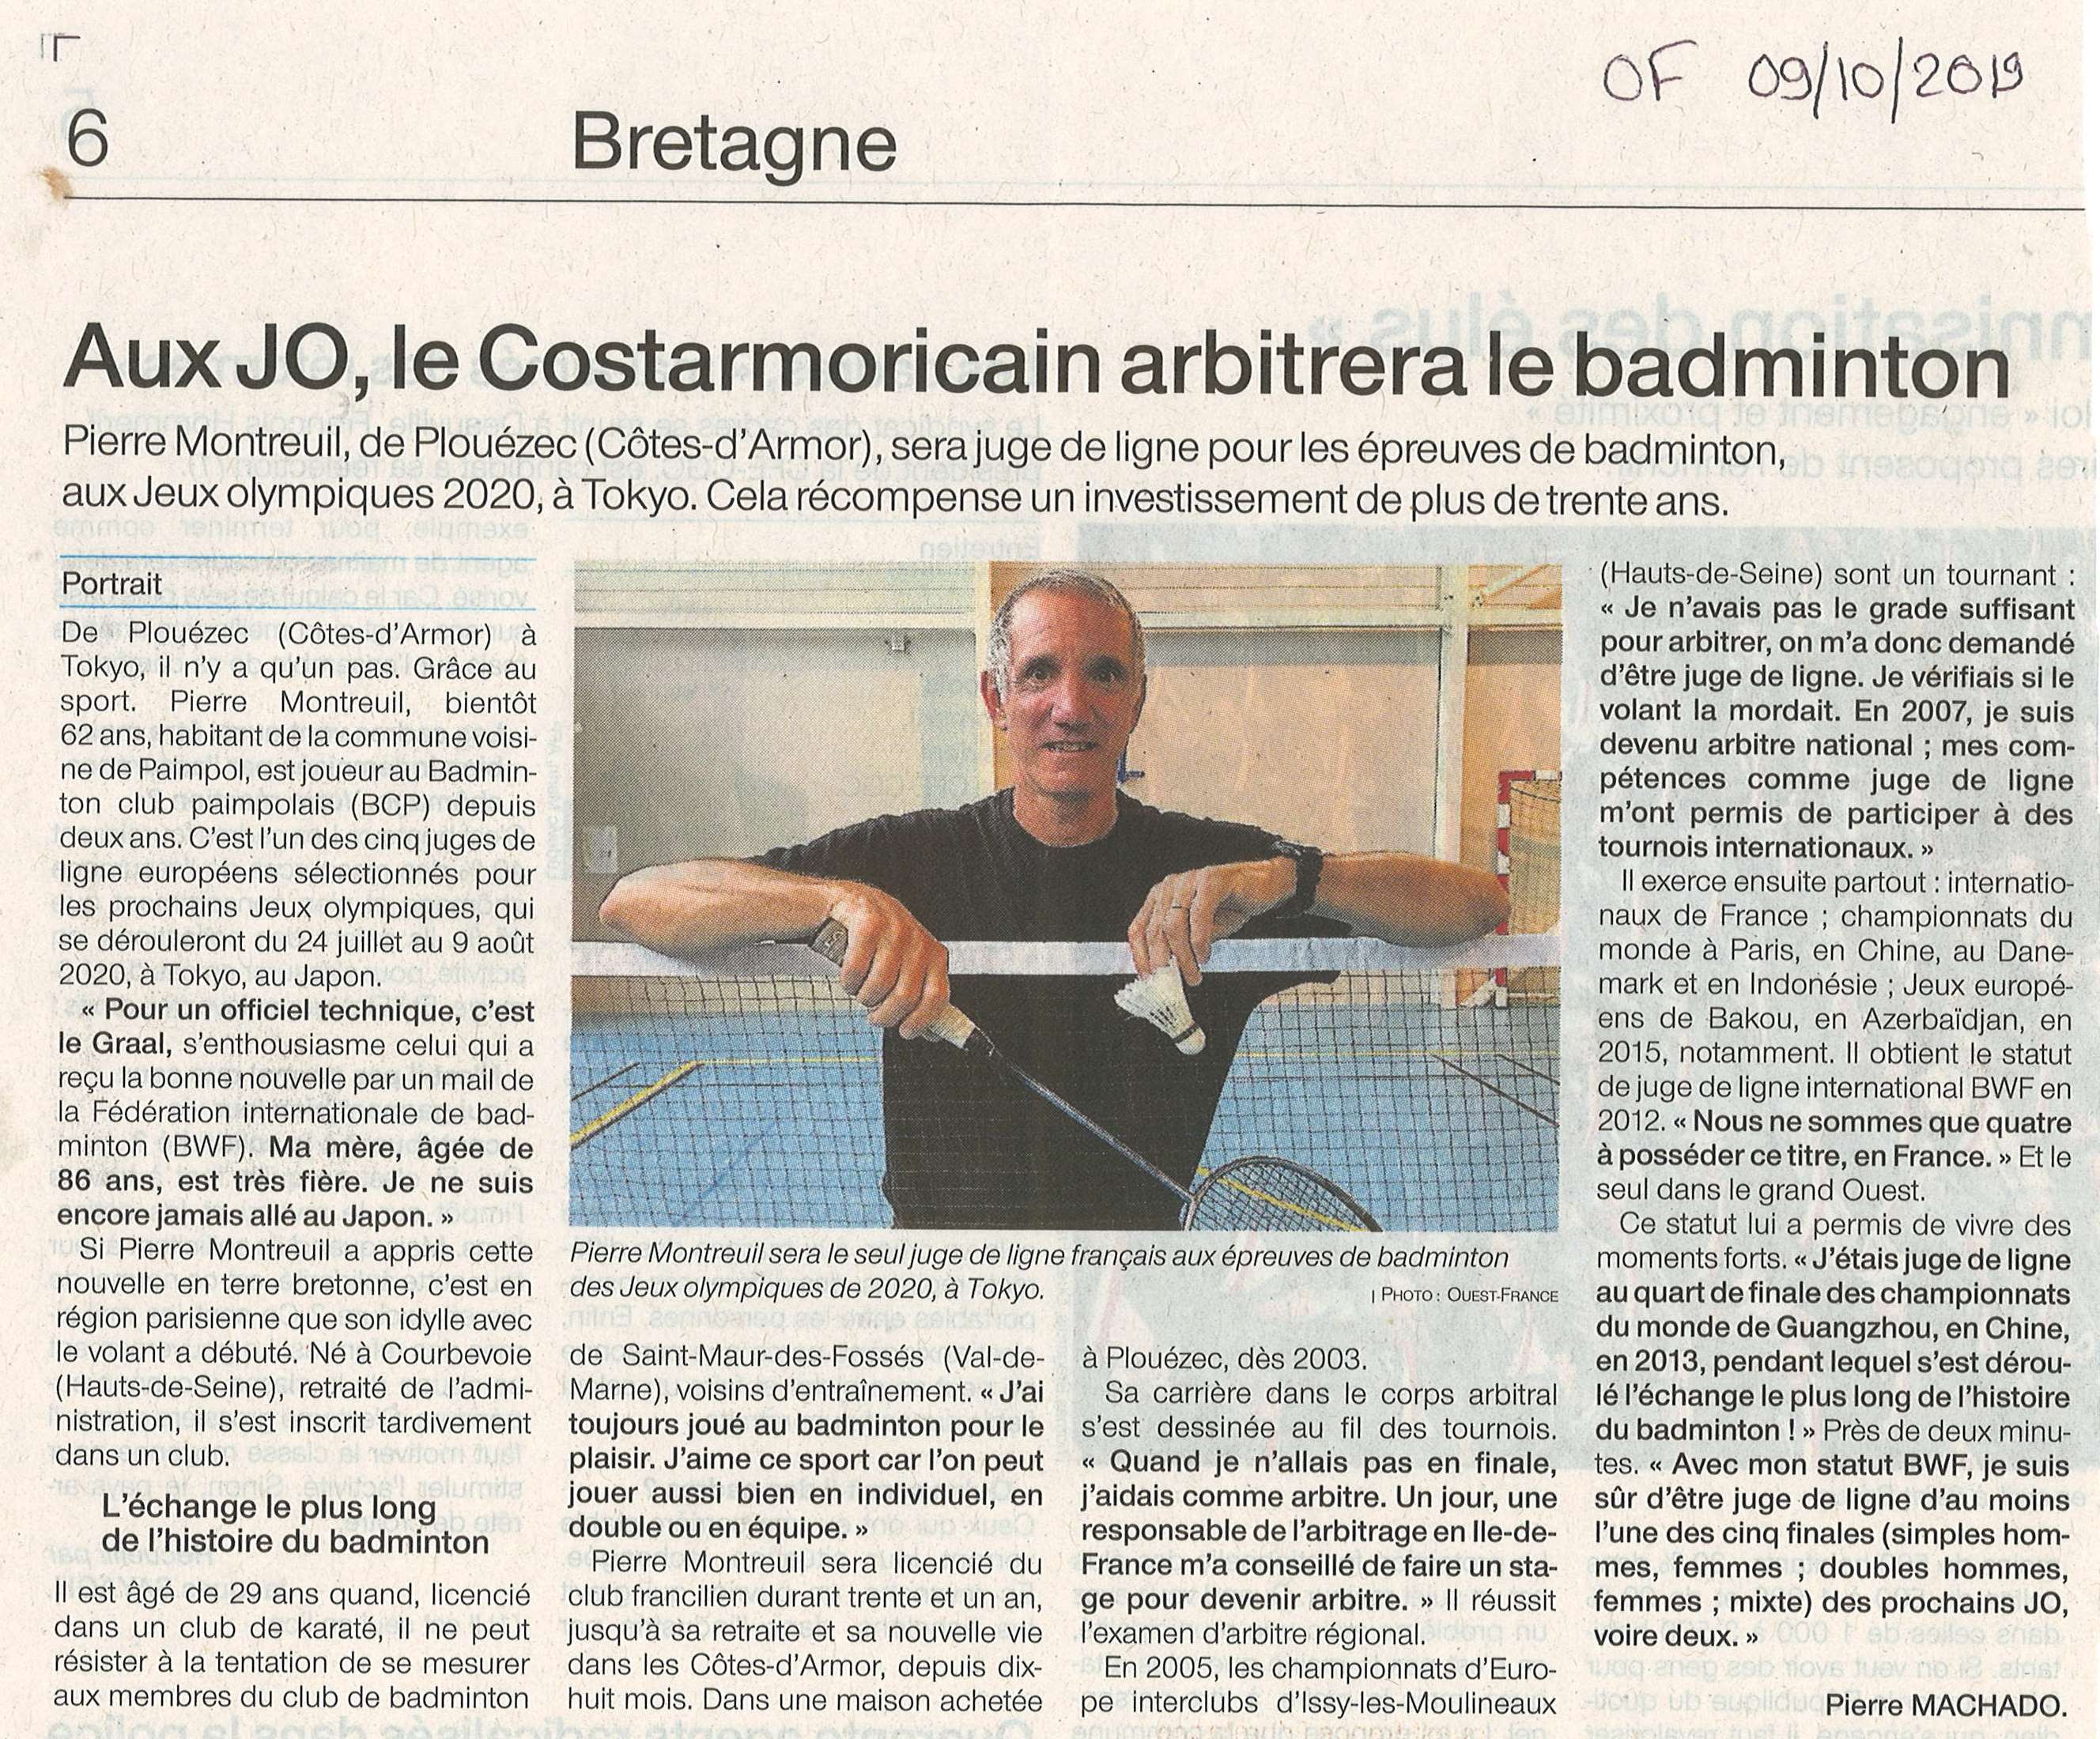 Article OF 09102019 Pierre MONTREUIL